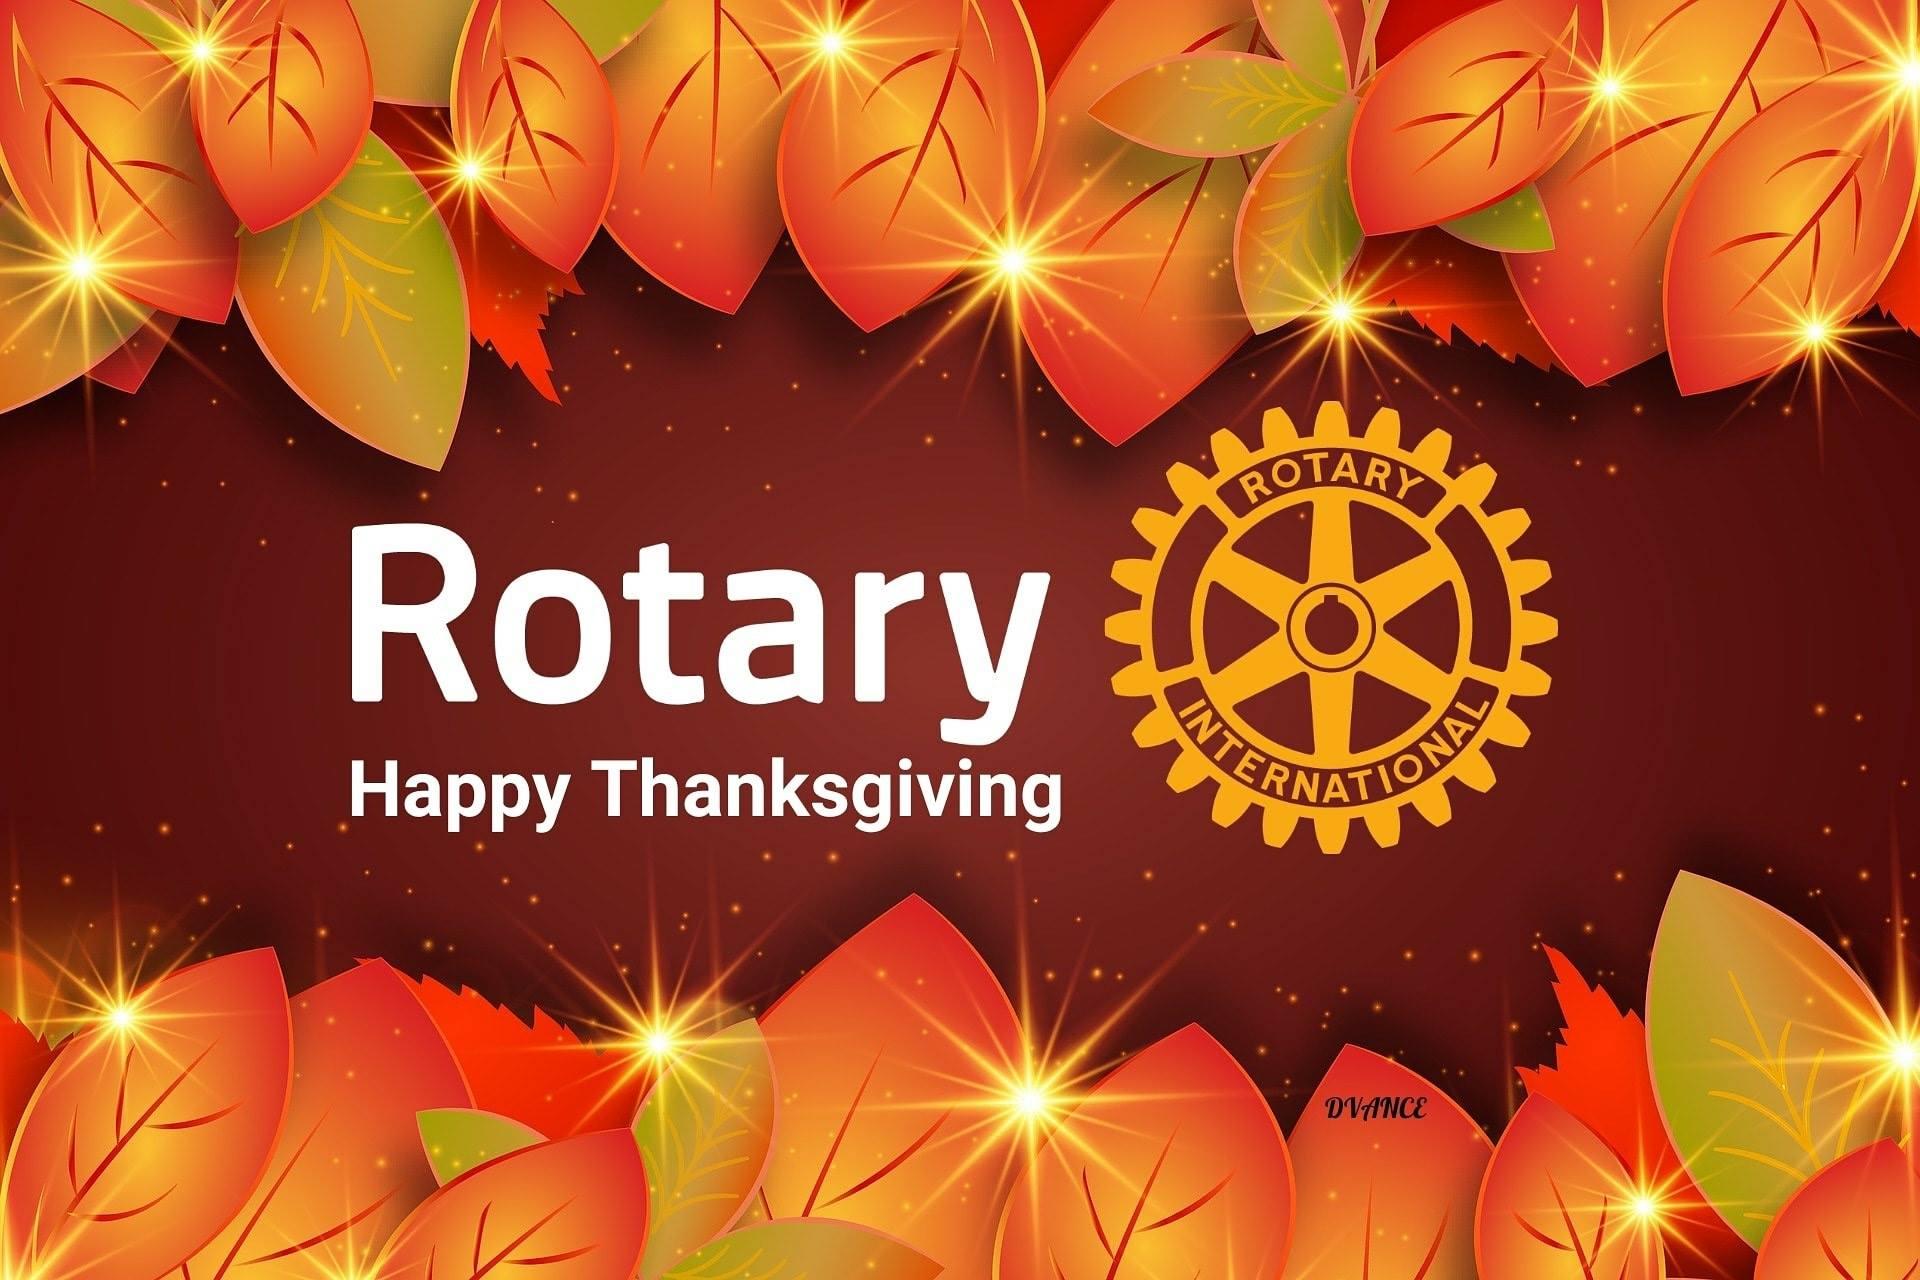 Happy Thanksgiving | Rotary Club of Downtown Sioux Falls